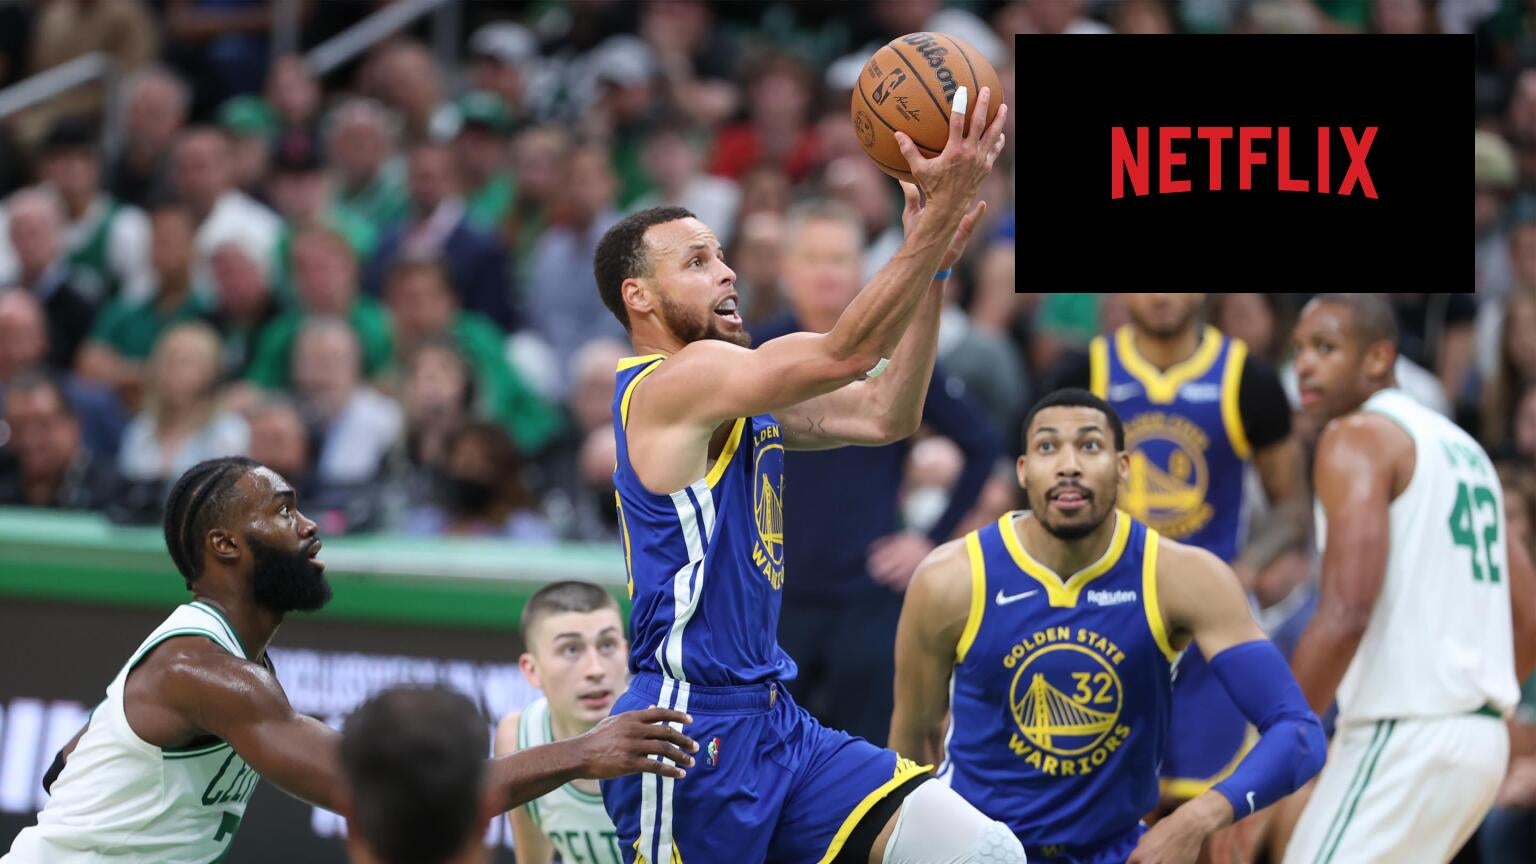 Steph Curry shooting a basketball with the Netflix logo